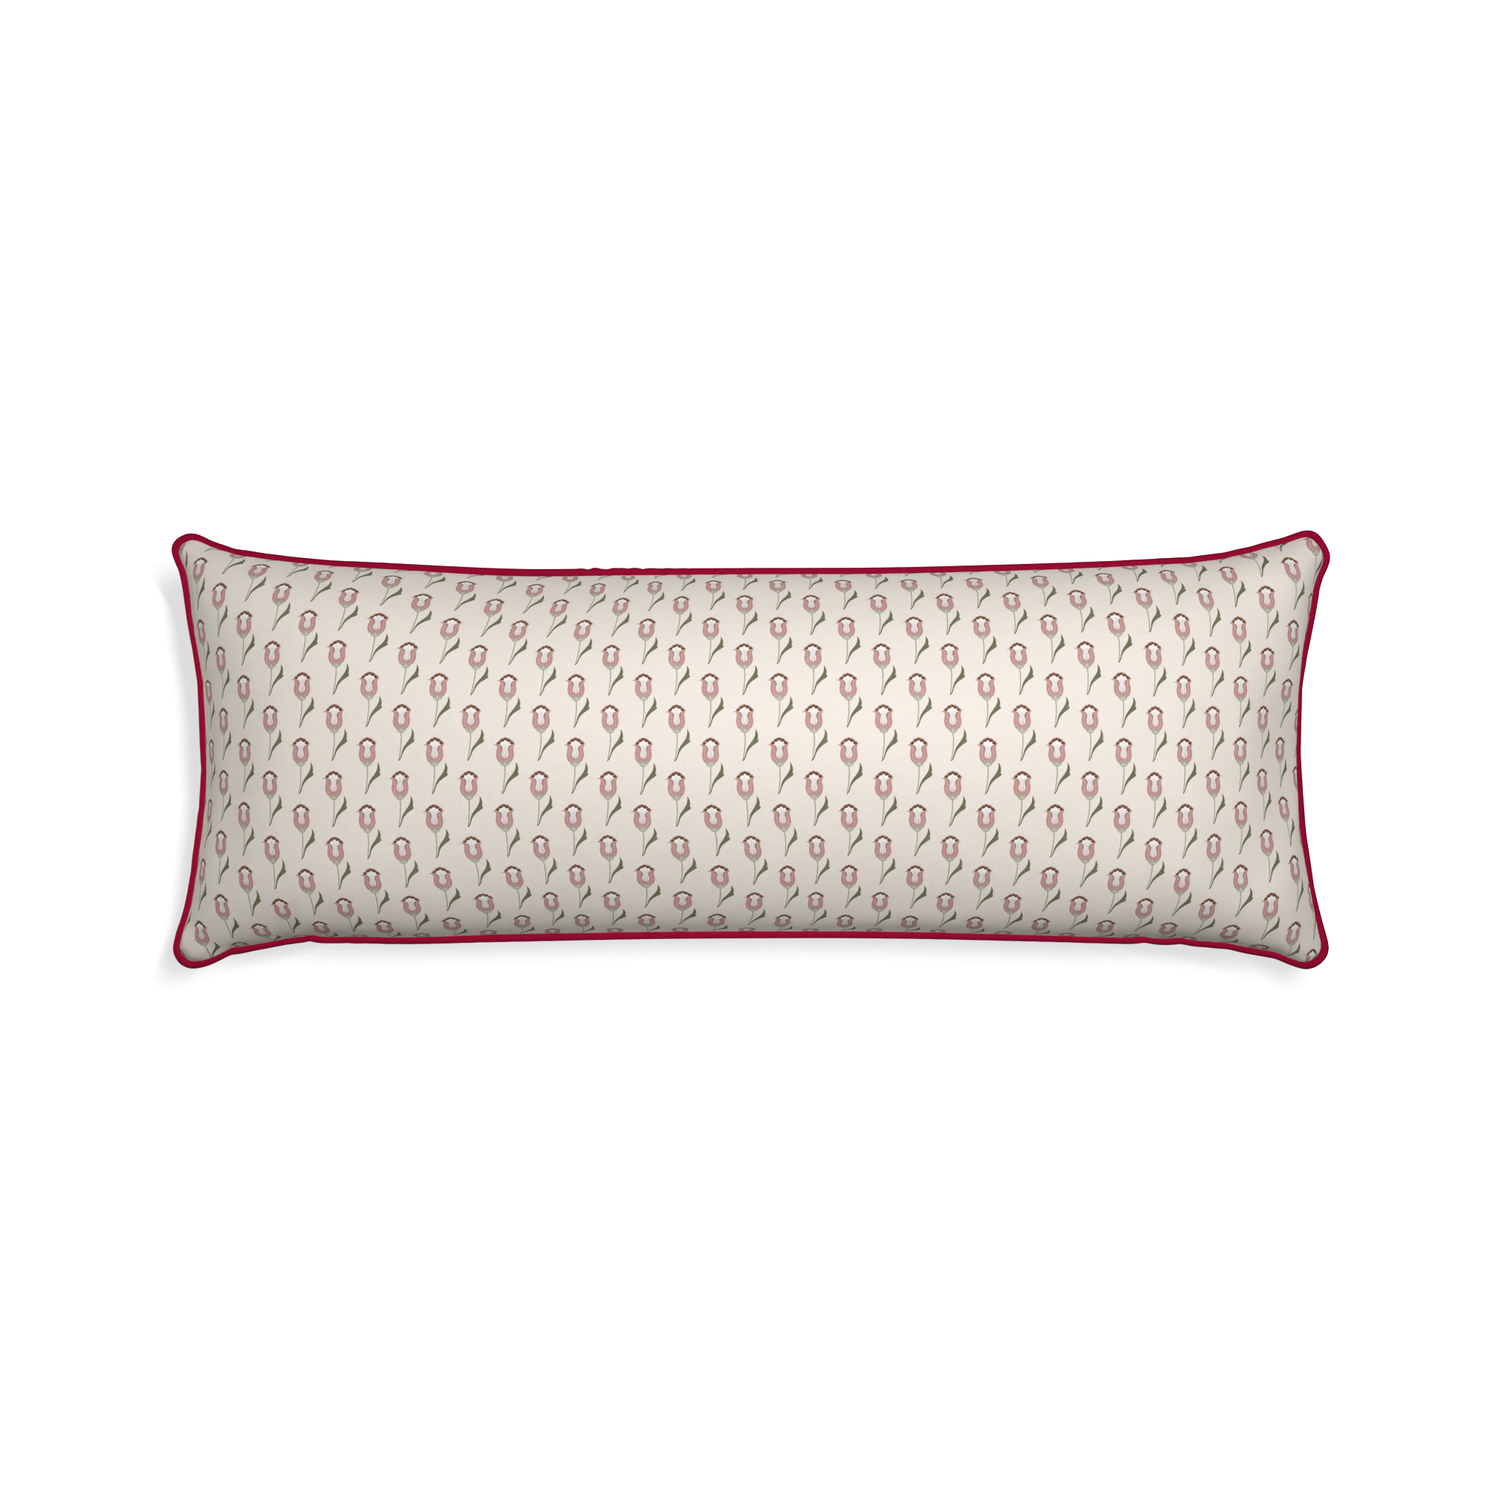 Xl-lumbar annabelle orchid custom pink tulippillow with raspberry piping on white background